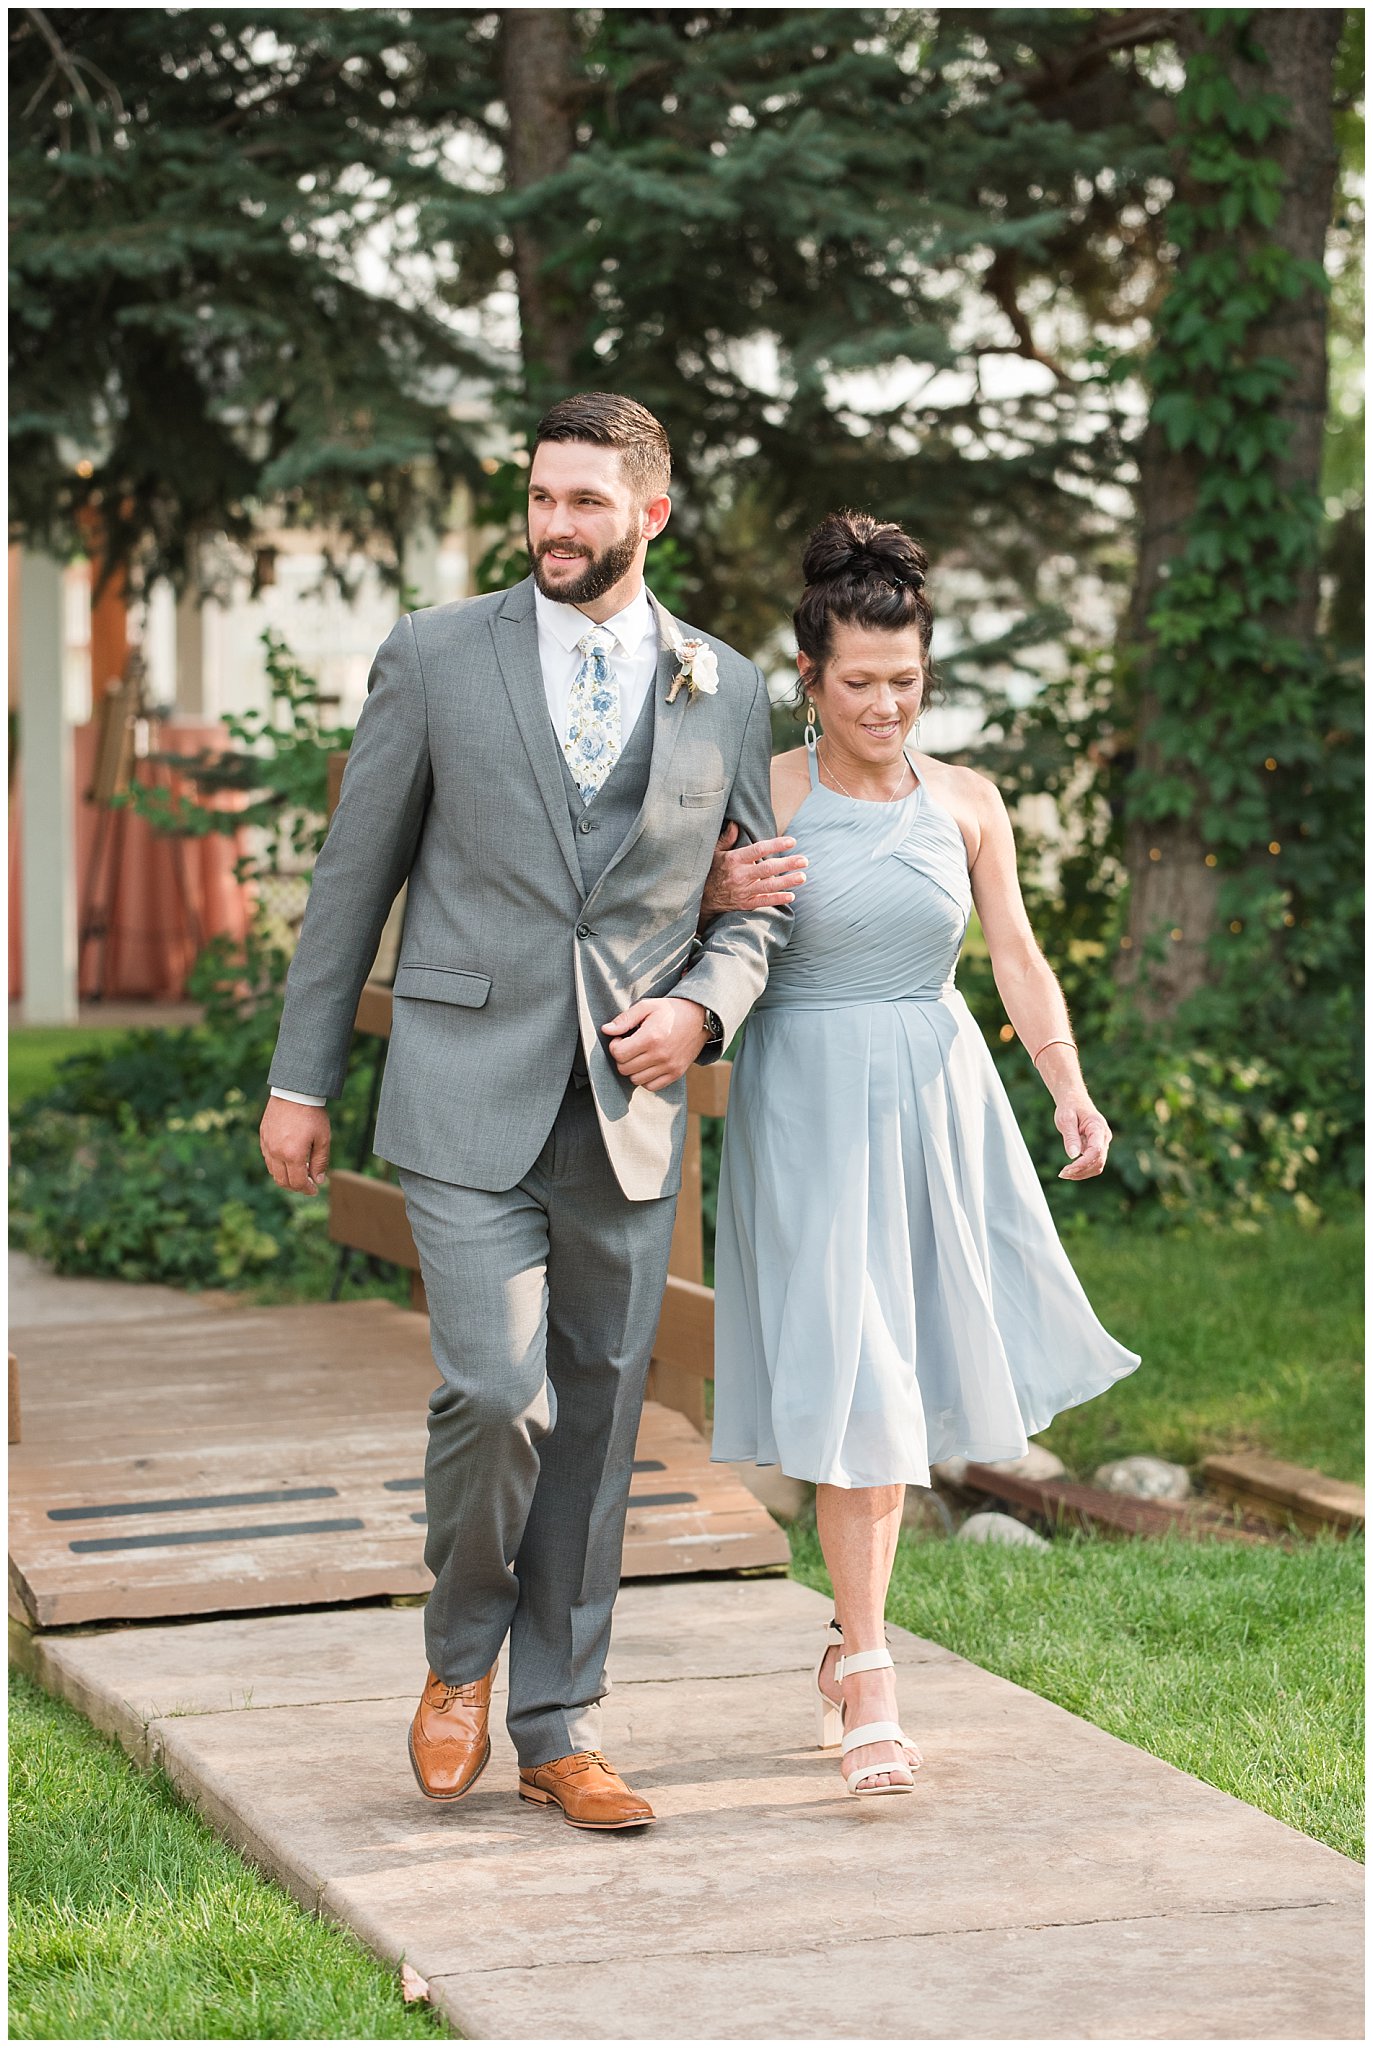 Groom walking down the aisle with mom | Dusty Blue and Rose Summer Wedding at Oak Hills Utah | Jessie and Dallin Photography